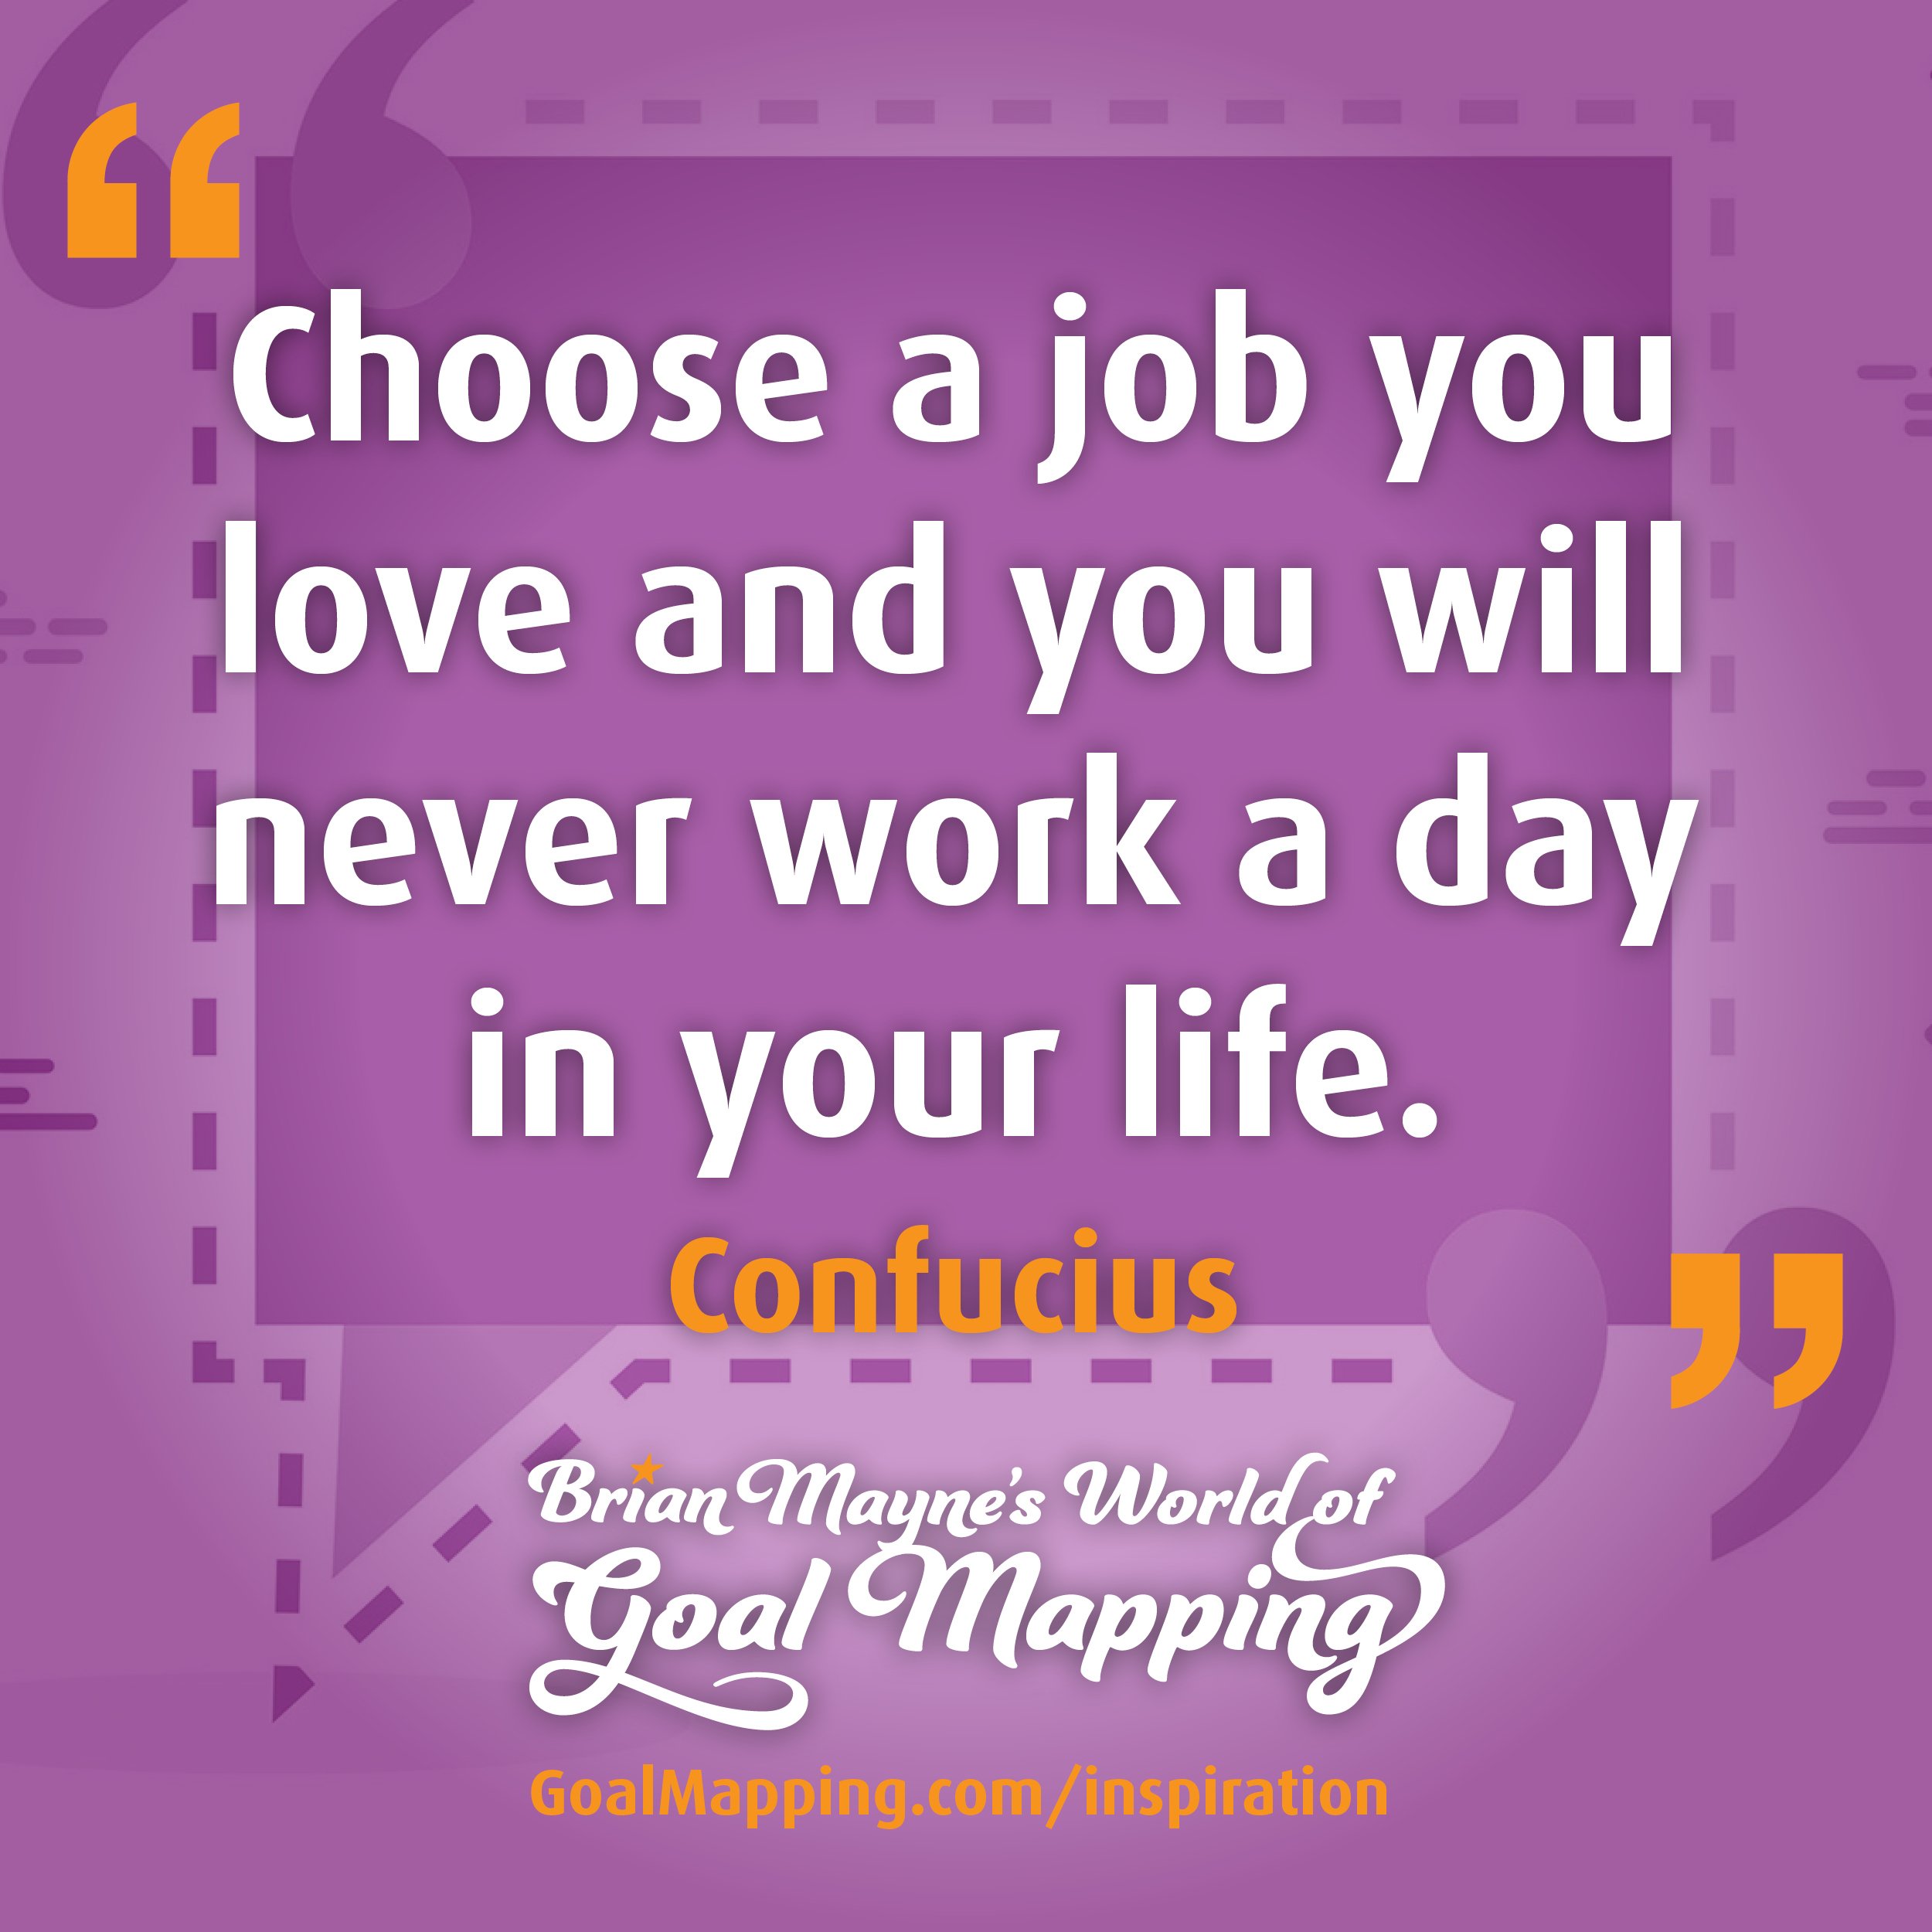 "Choose a job you love and you will never work a day in your life." Confucius